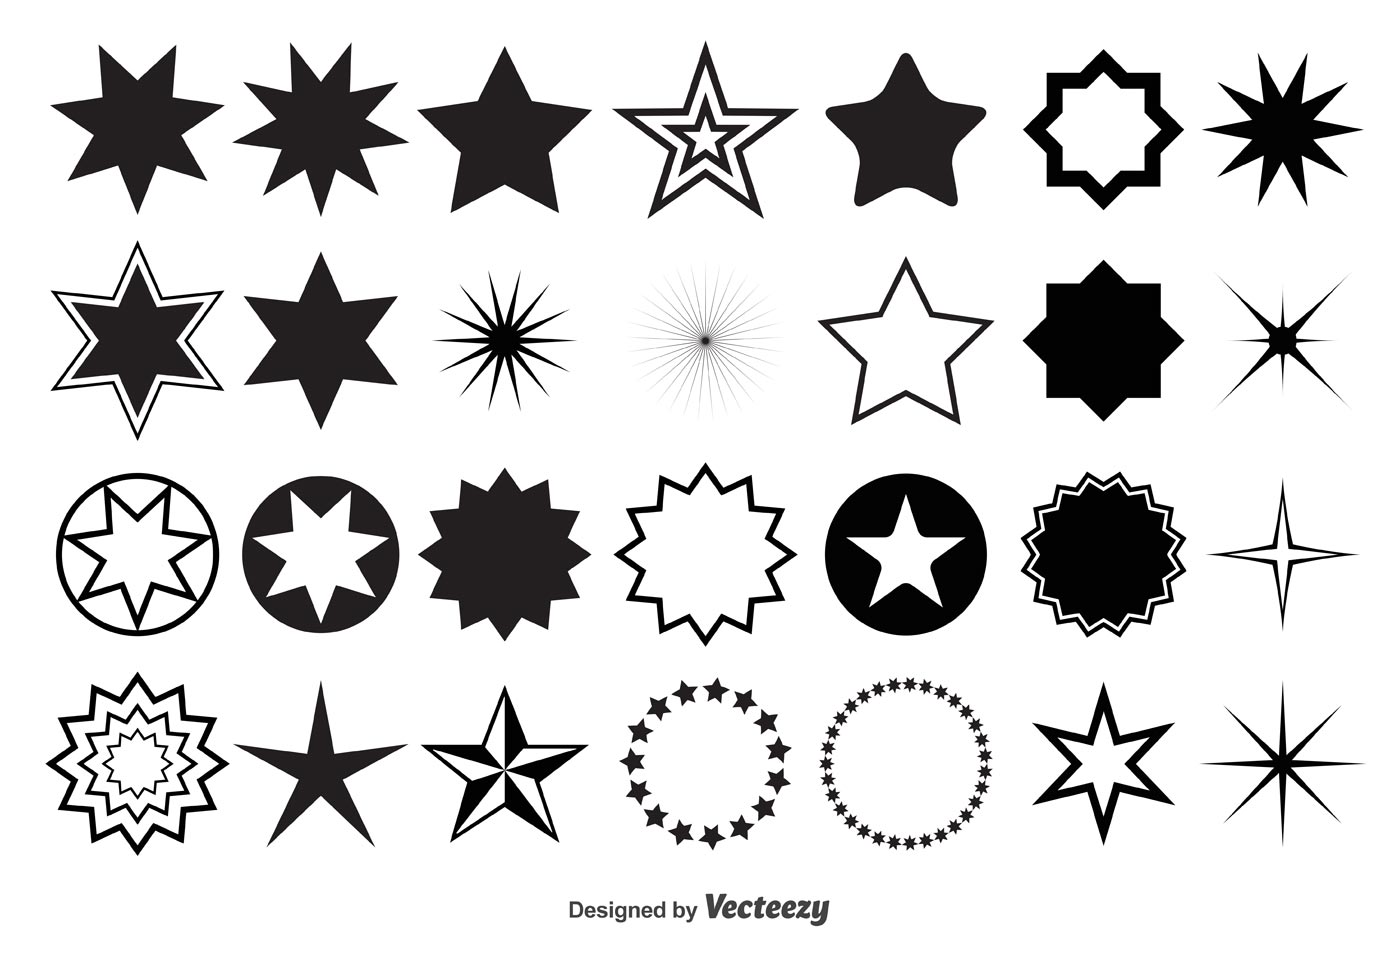 Vector Star Shapes Download Free Vector Art, Stock